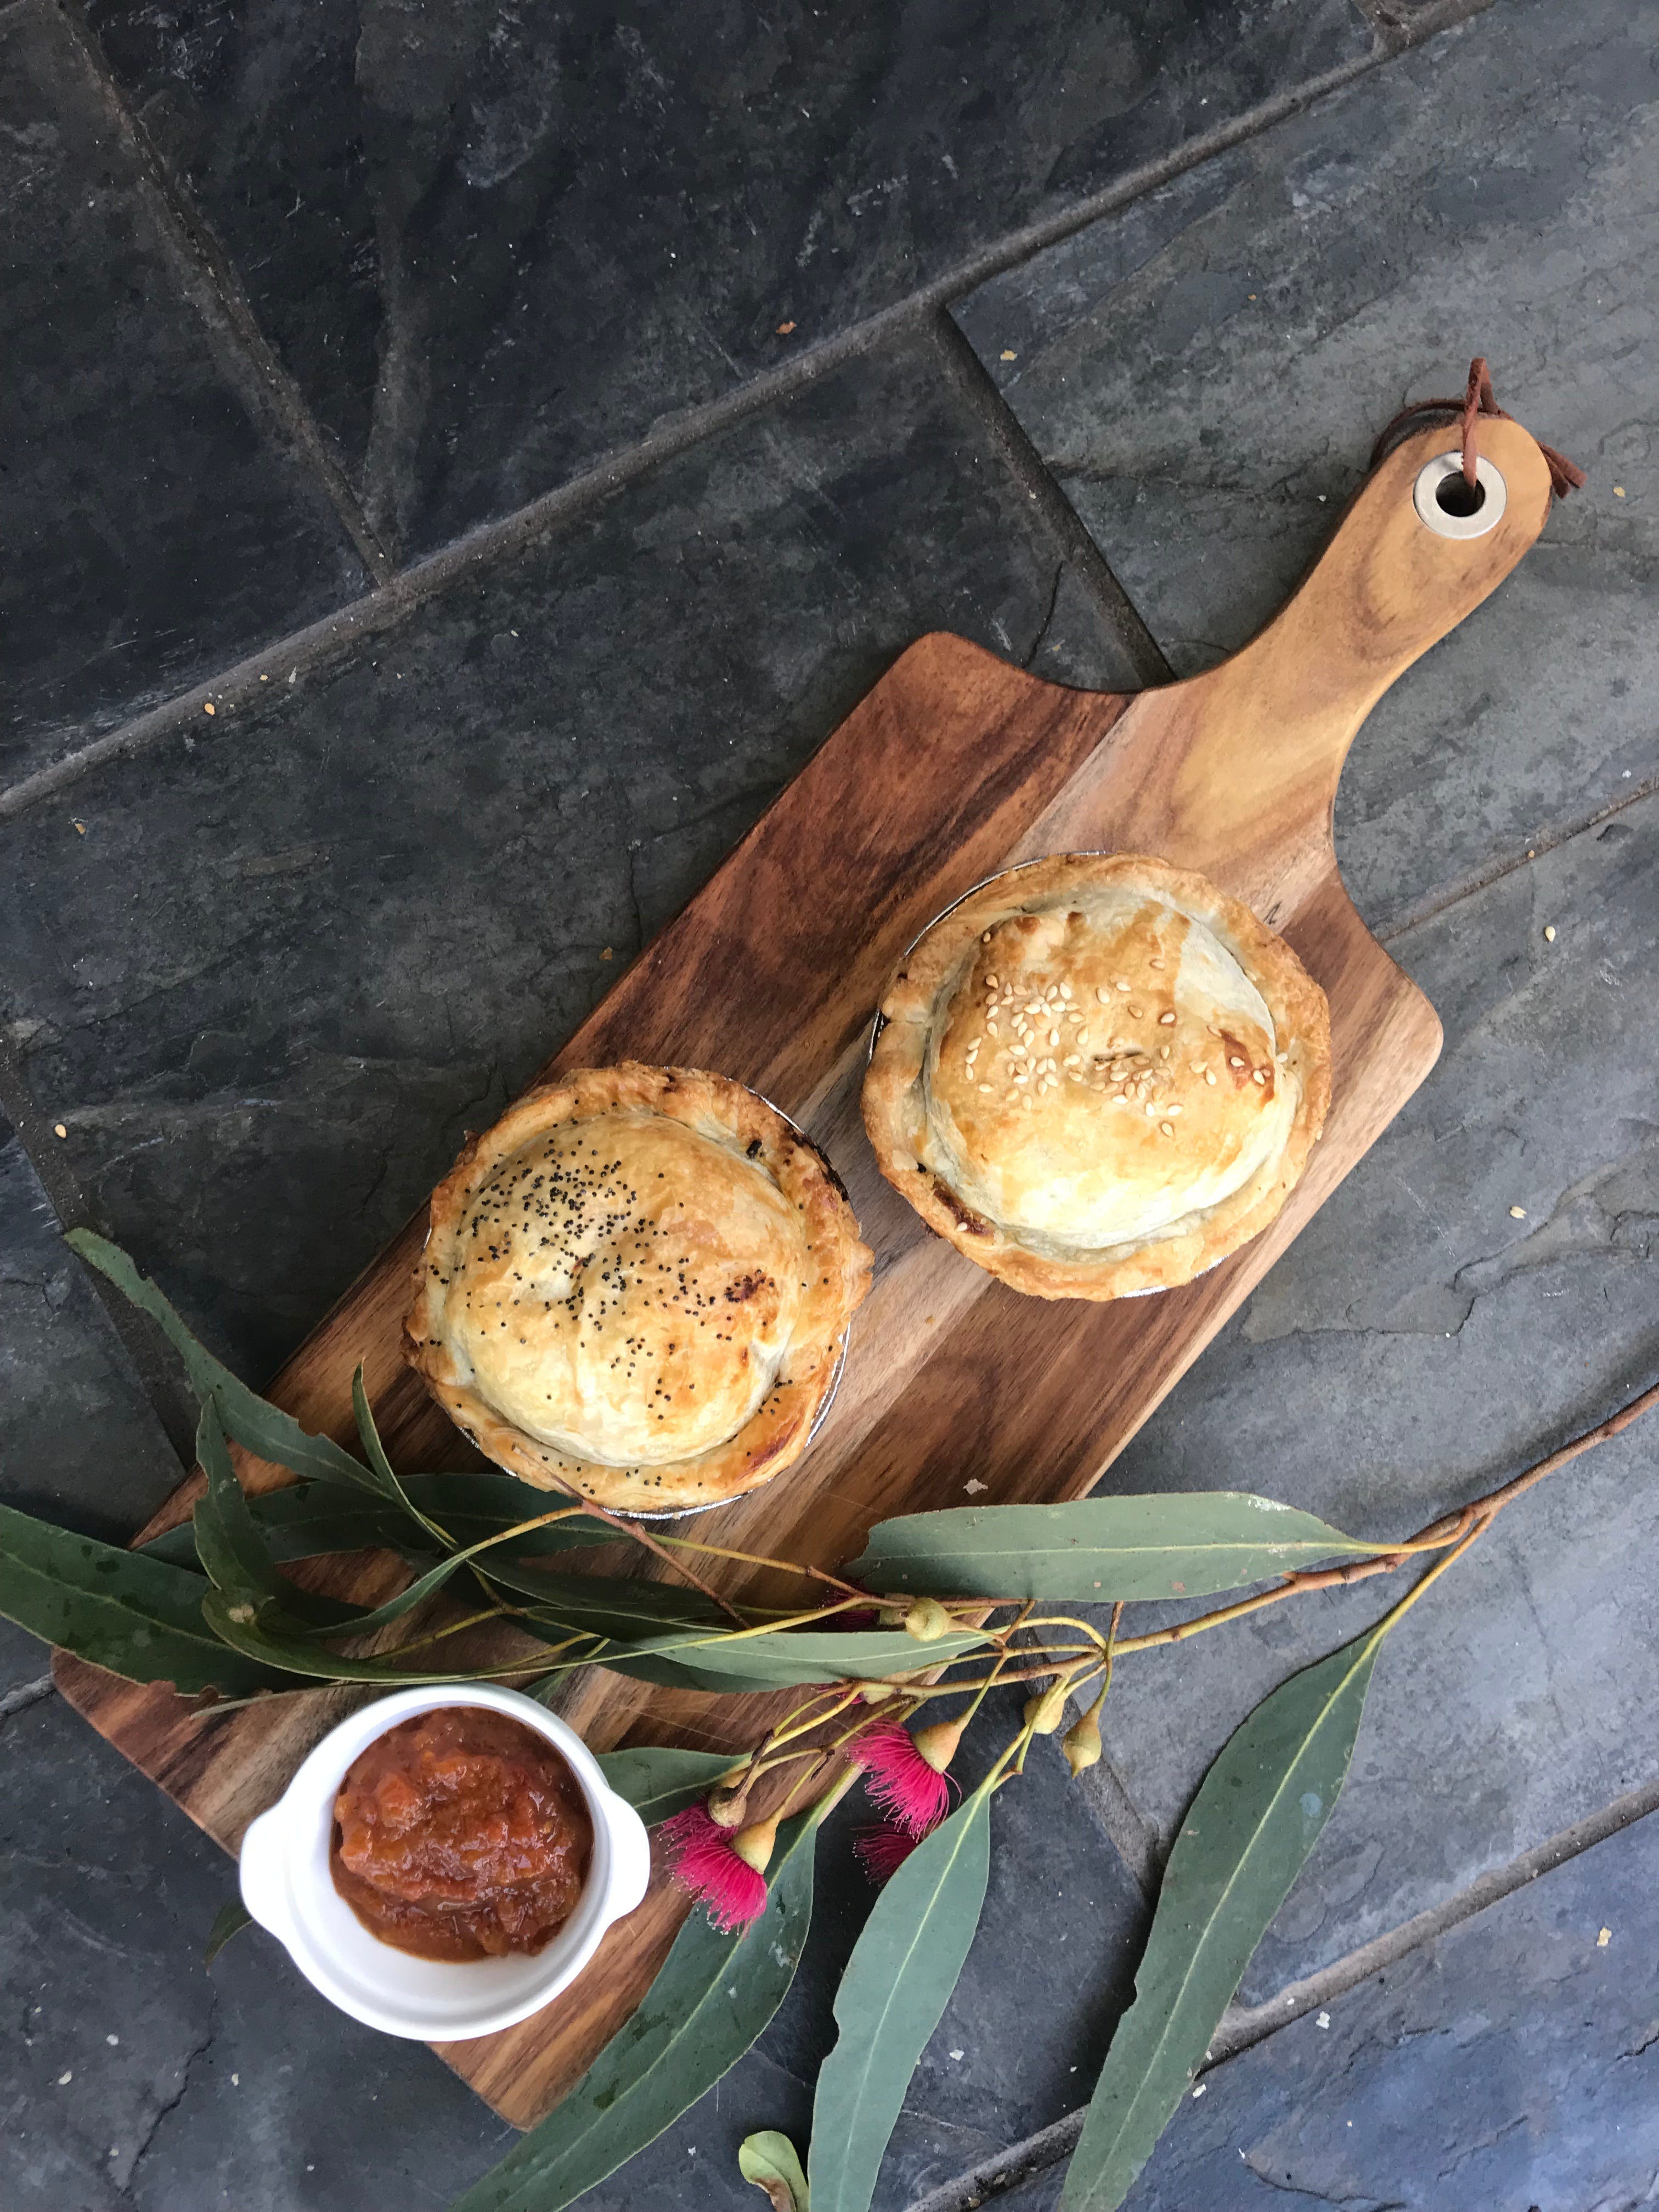 Aged Wine and Vintage Pies - C Tourism